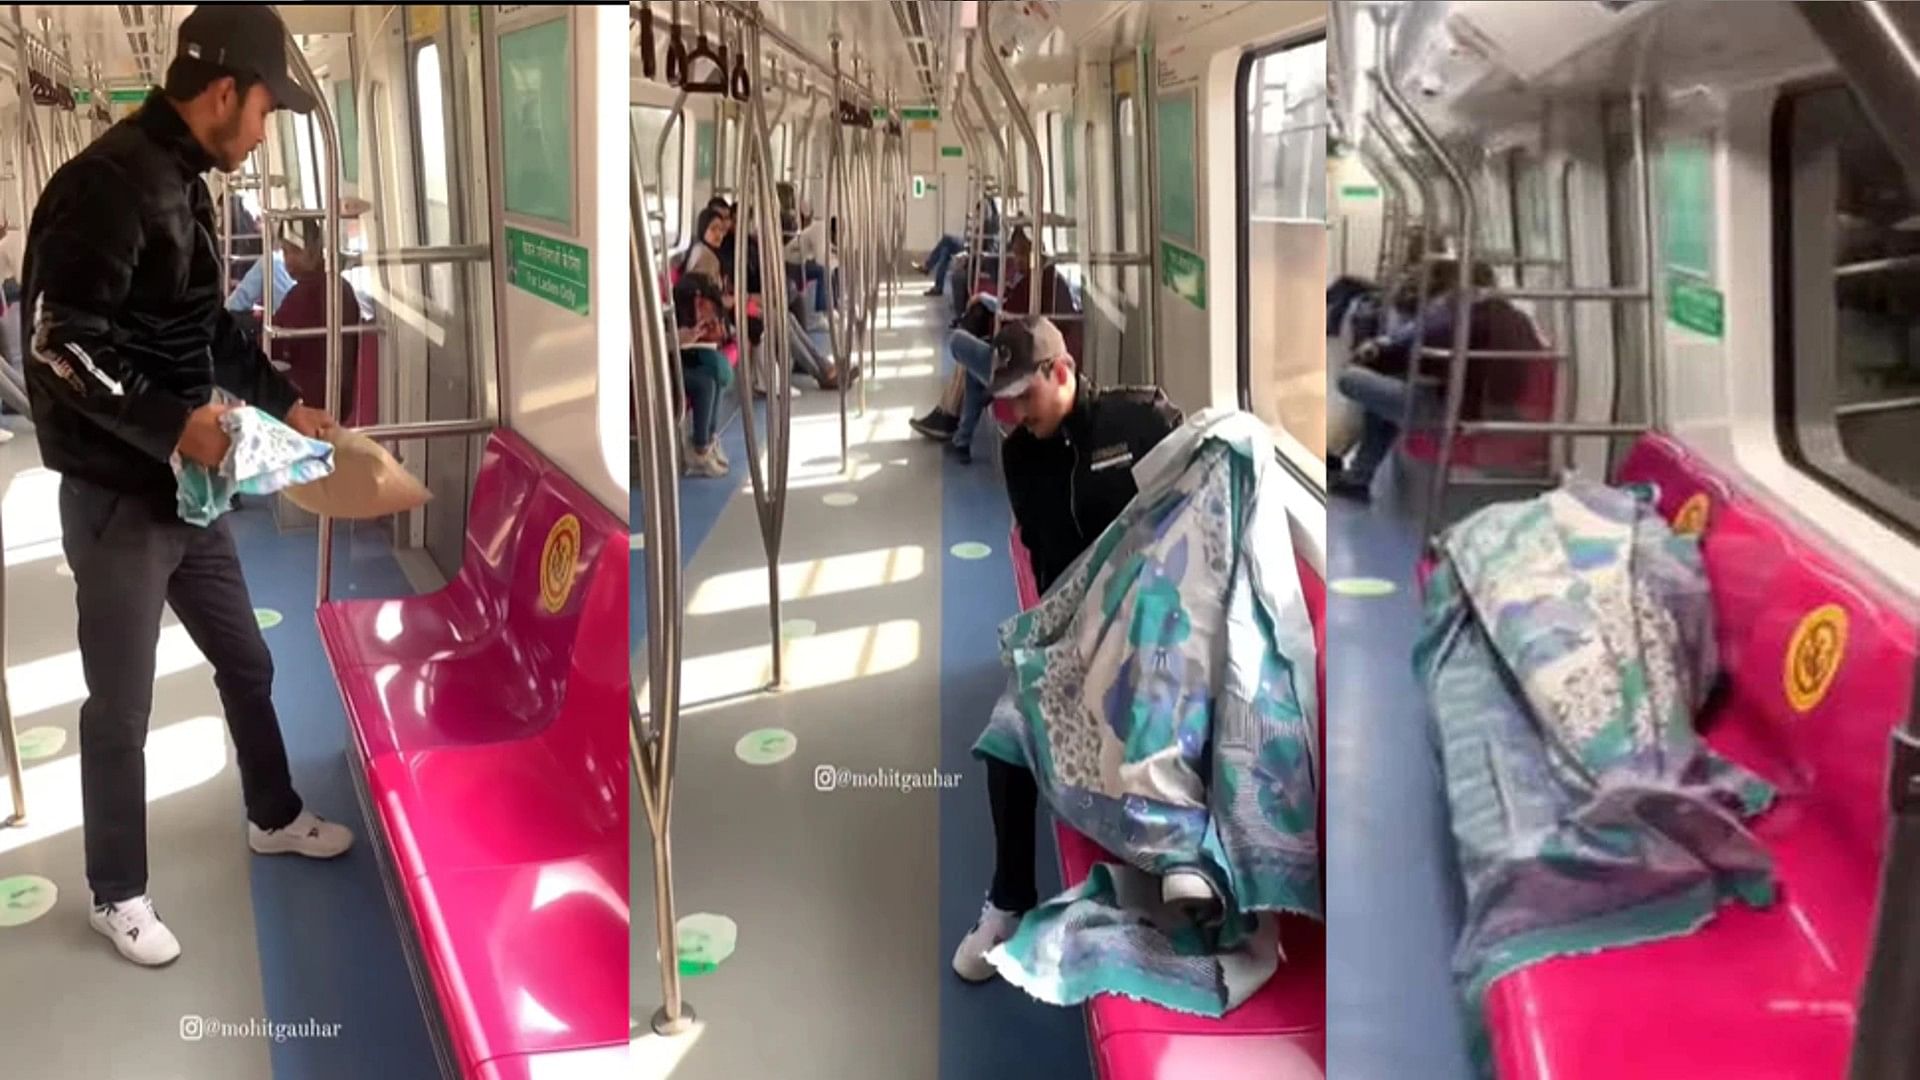 Boy lying down with a pillow-sheet in the metro, video went viral on social media